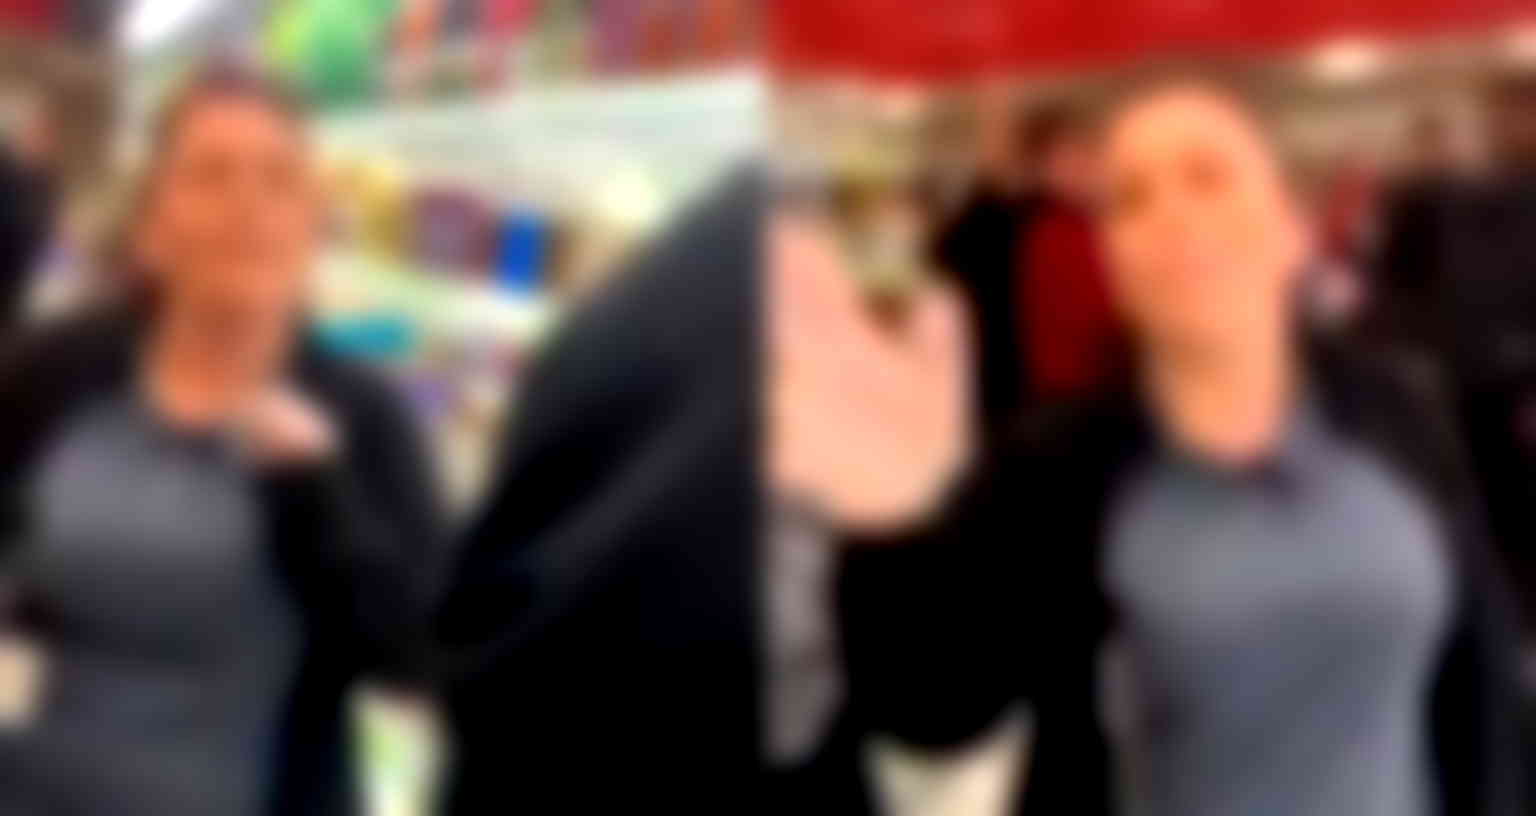 Asian Canadian Woman Wearing Face Mask Kicked Out of Toronto Supermarket